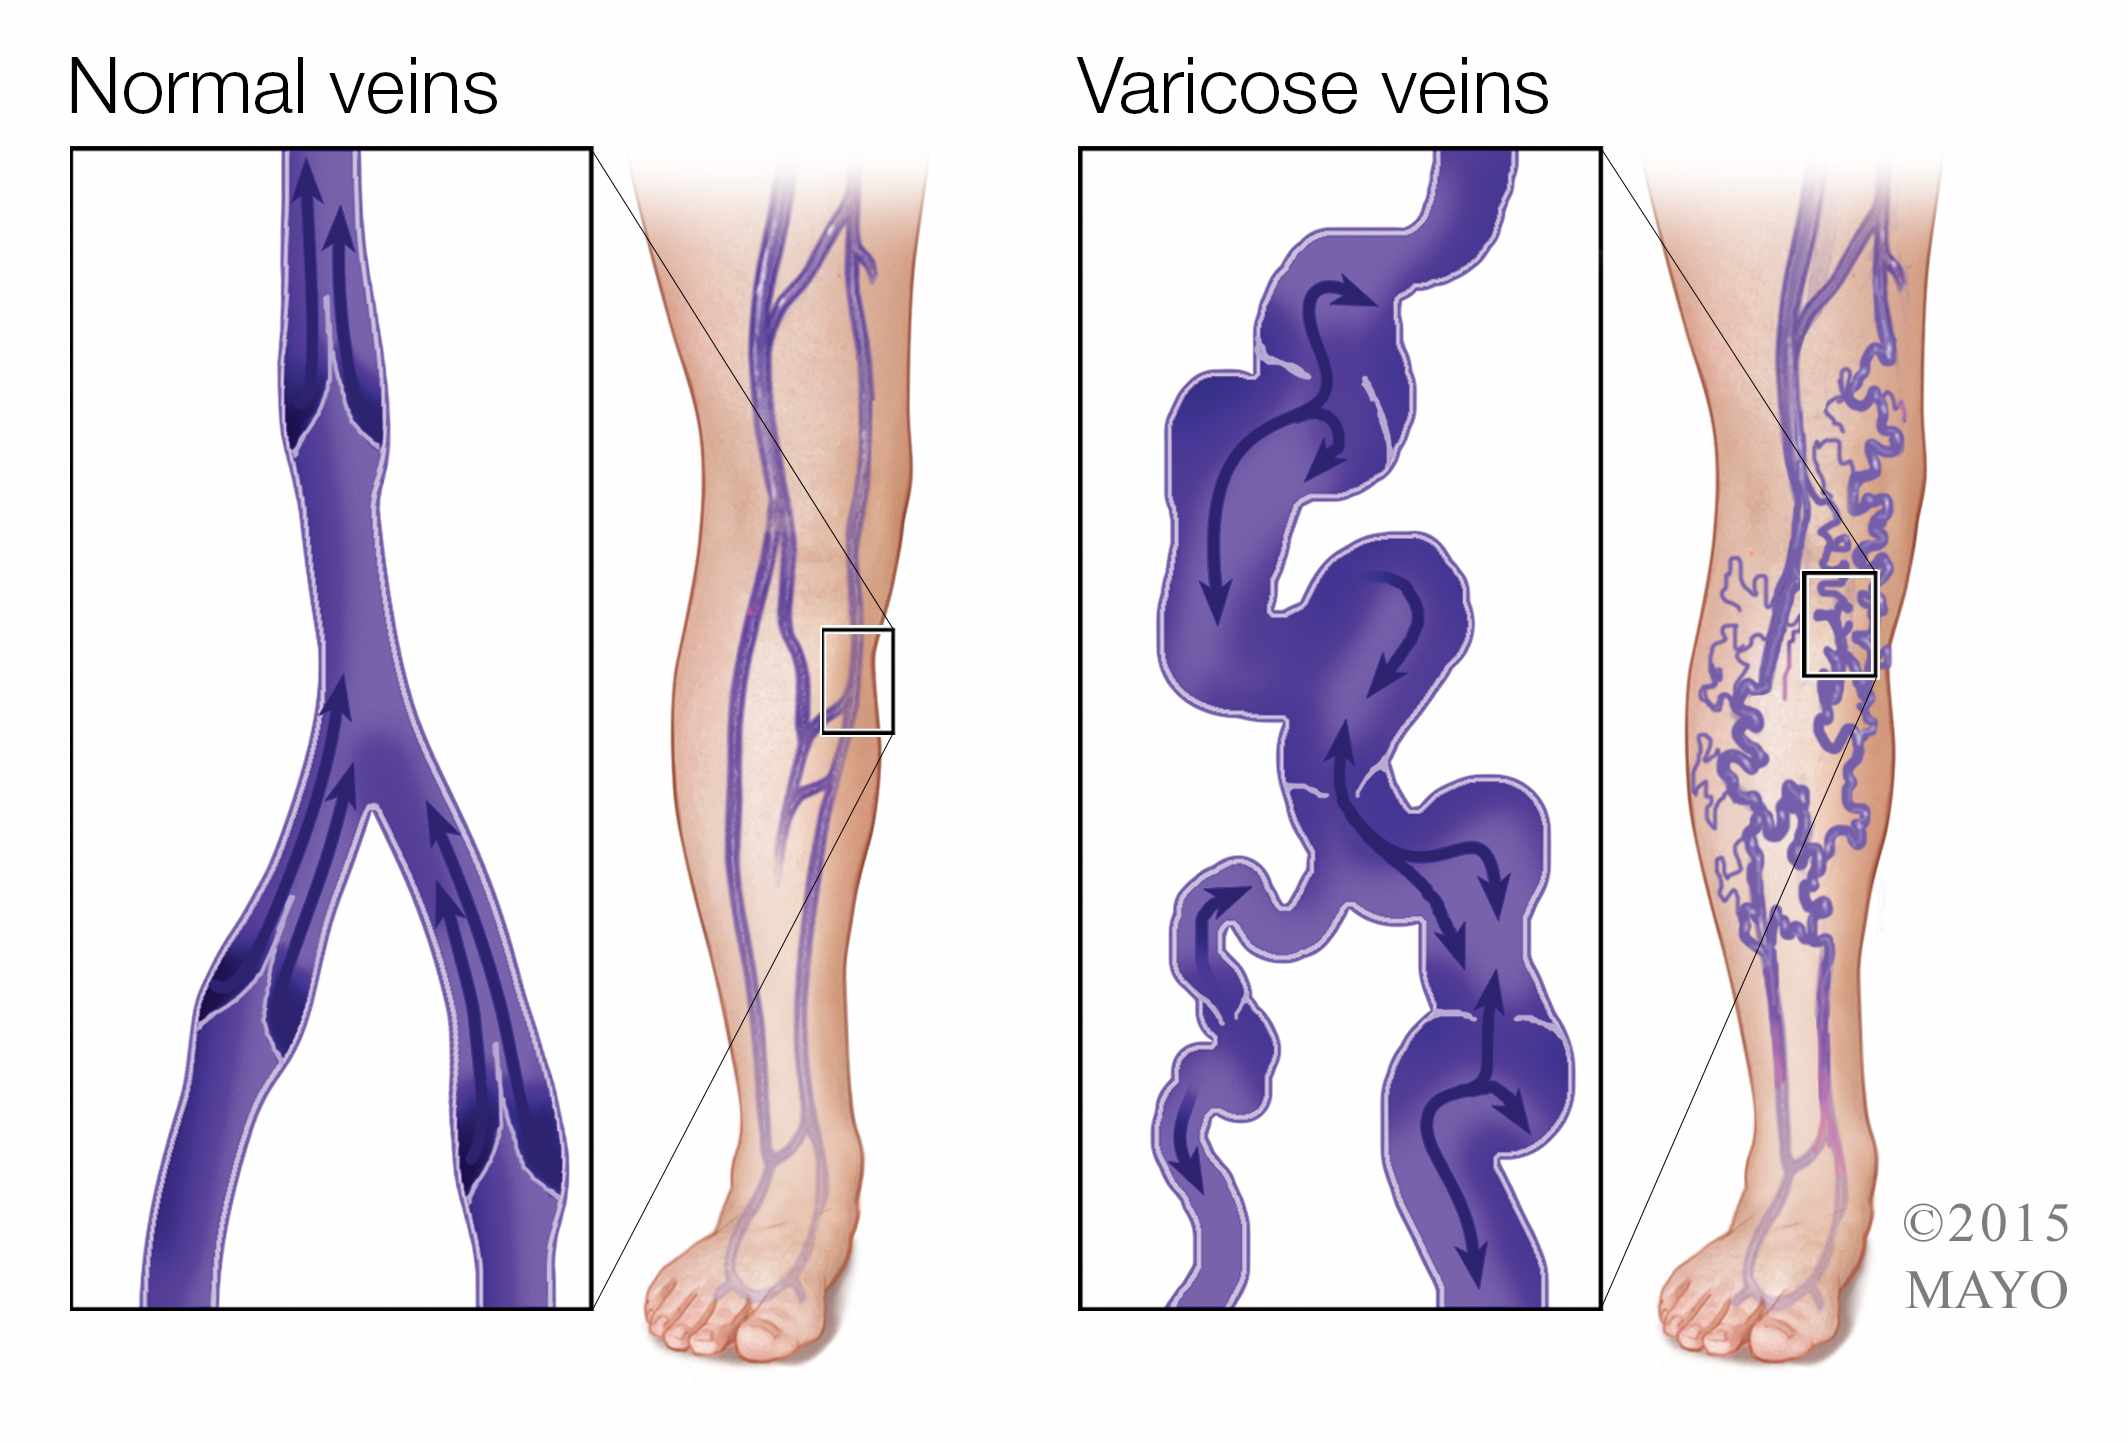 Are spider veins anything to worry about?